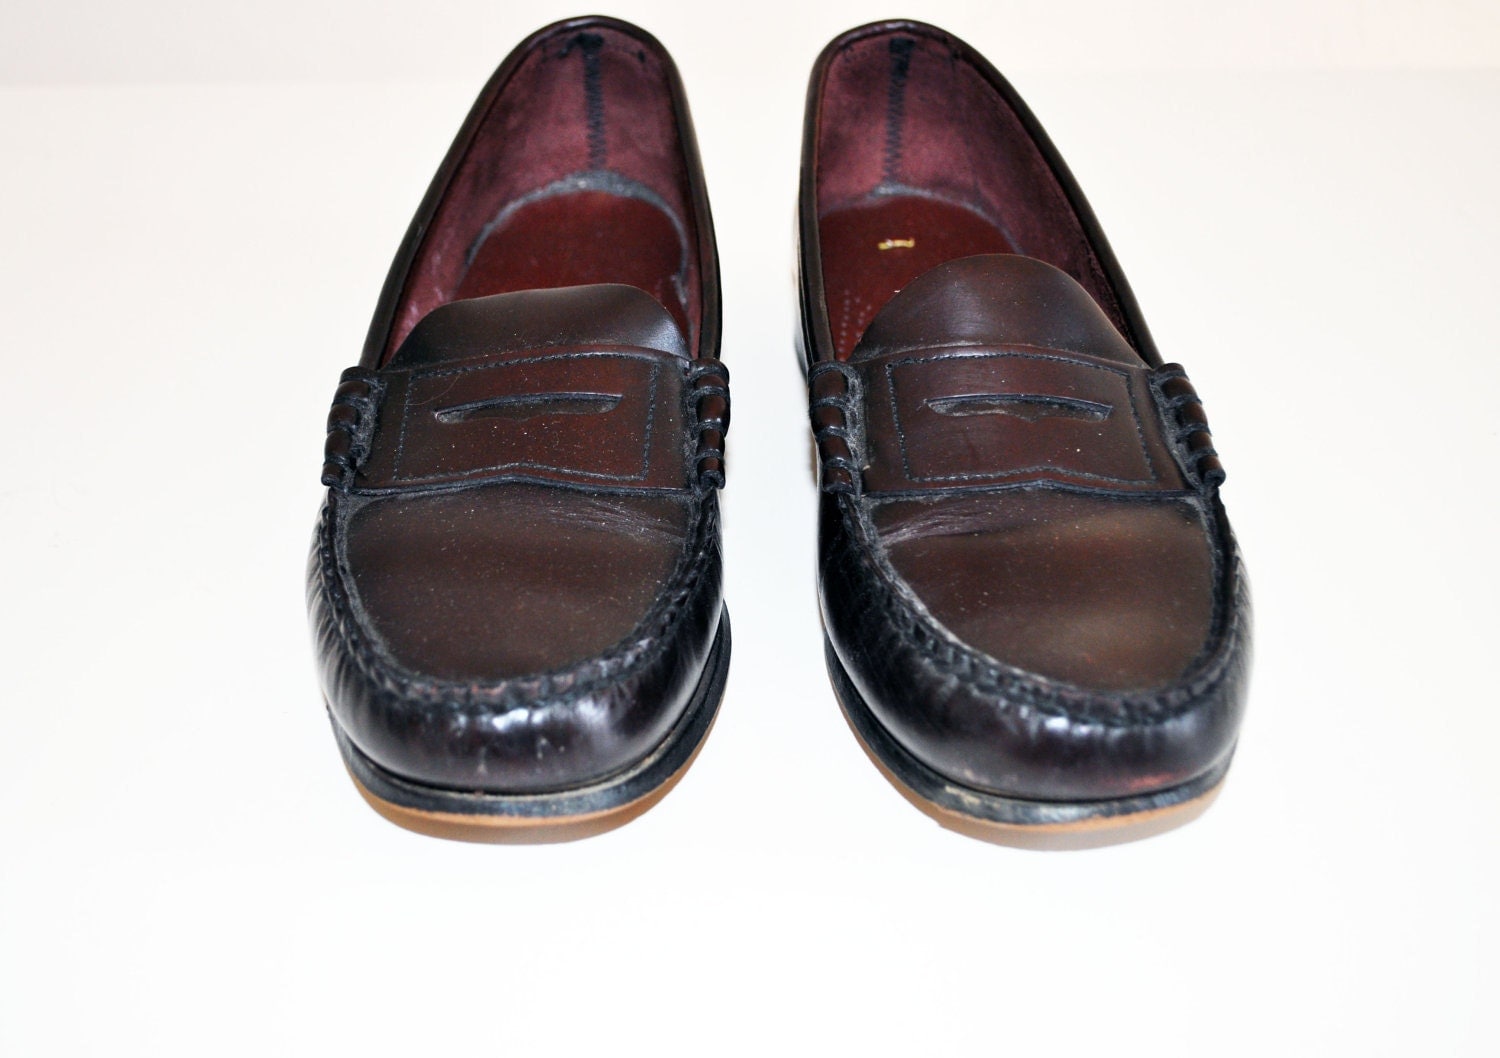 Dexter Leather Penny Loafers Chocolate Size 7. 5M CLASSIC